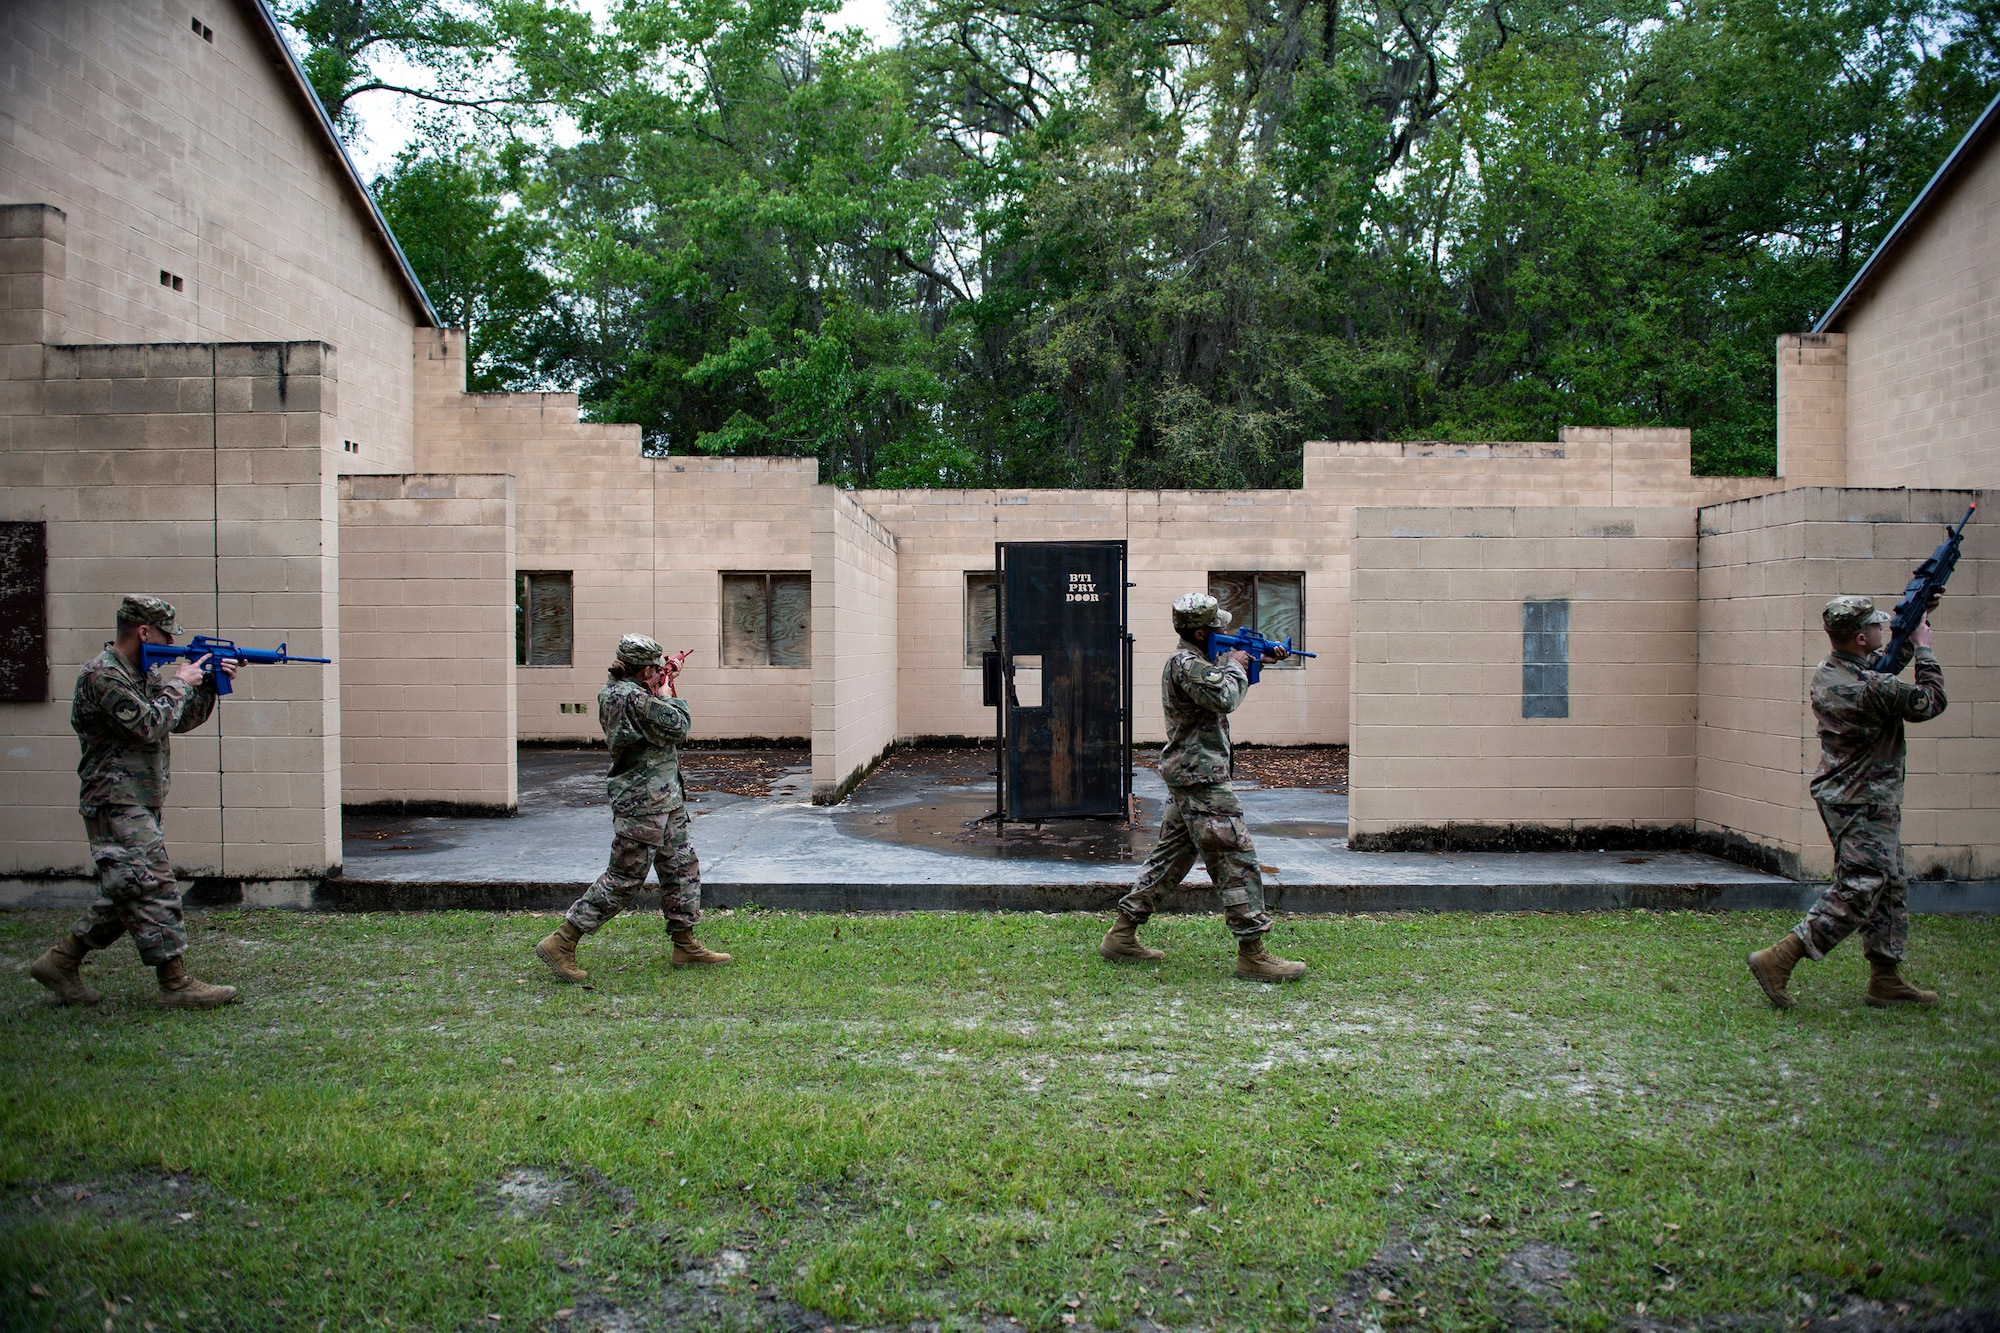 Airmen from the 824th Base Defense Squadron practice staggered formation techniques during dismounted training operations, March 26, 2018, at Moody Air Force Base, Ga. The operations conducted were a part of the 820th Base Defense Group’s (BDG) Initial Qualification Training, which is given to new Airmen coming into the BDG as an opportunity to learn a baseline of basic combat skills that will be needed to successfully operate as a cohesive unit while in a deployed environment. (U.S. Air Force photo by Airman 1st Class Erick Requadt)